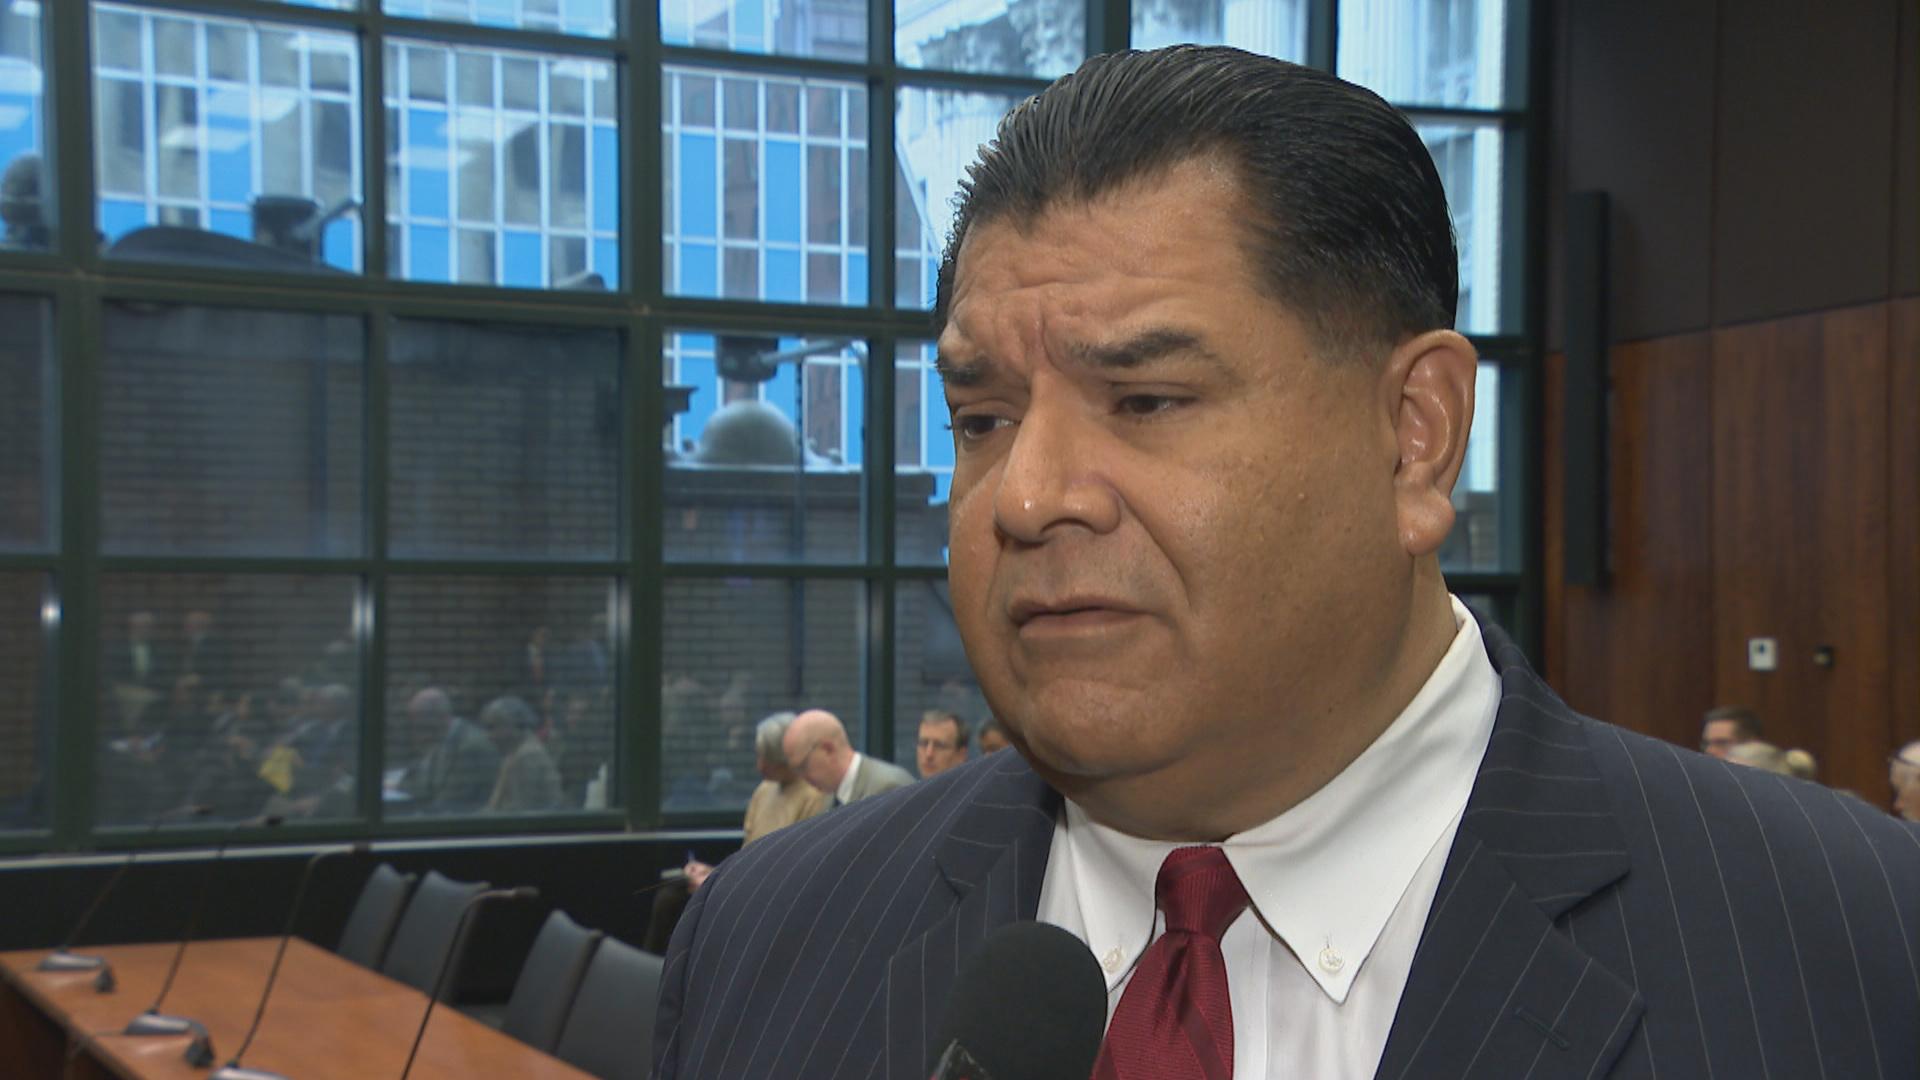 In this file photo, state Sen. Martin Sandoval speaks with WTTW News.